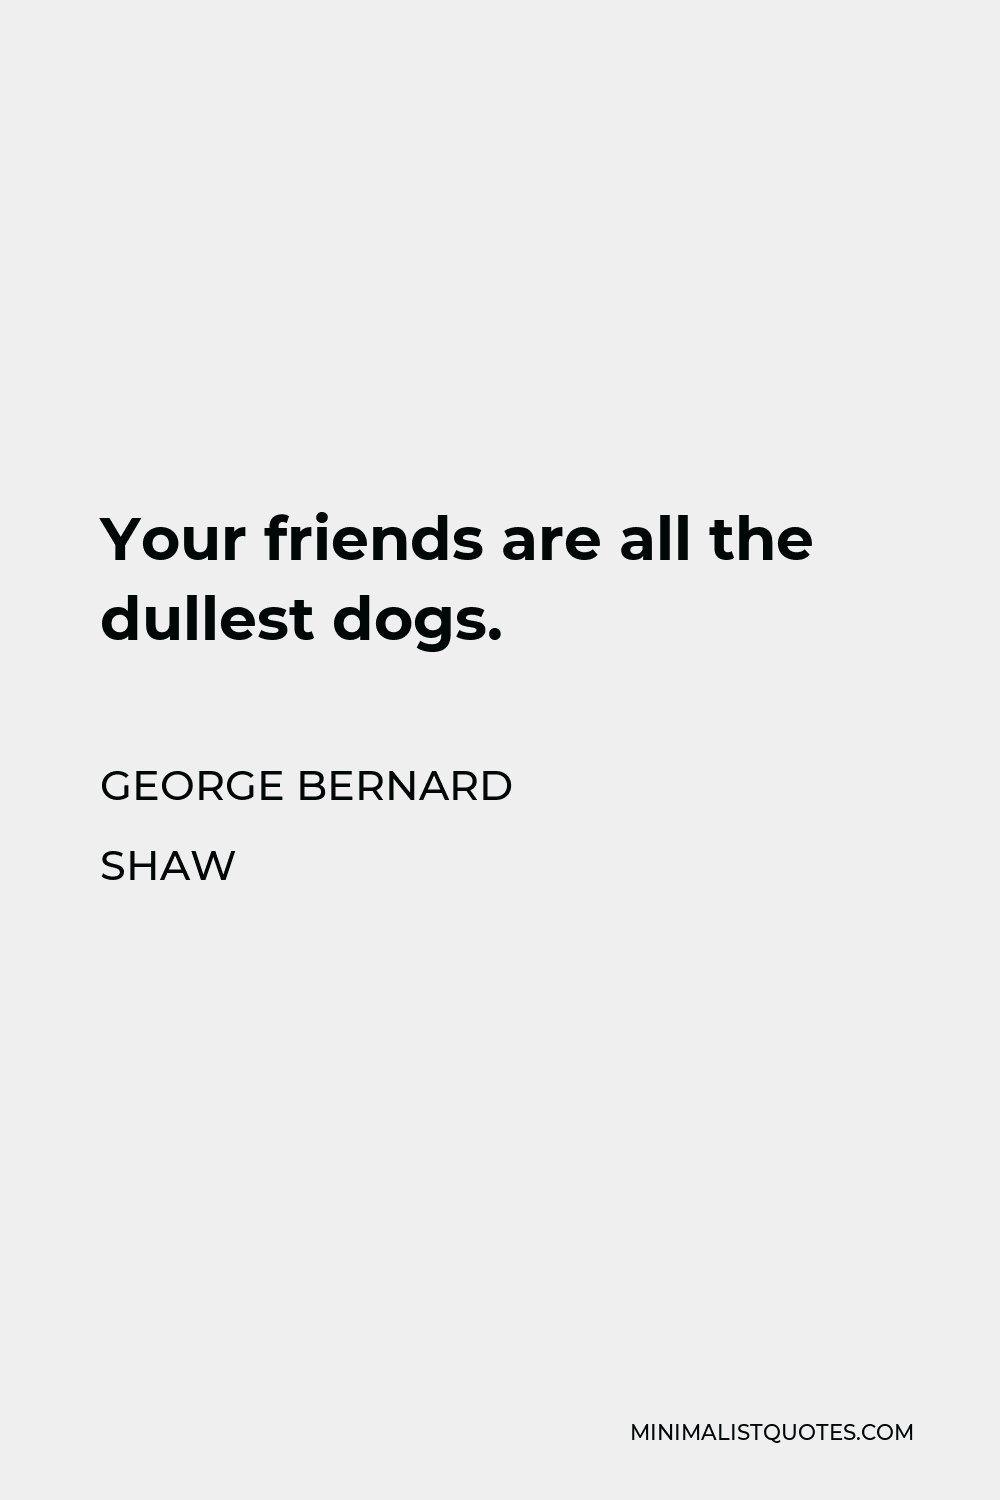 George Bernard Shaw Quote - Your friends are all the dullest dogs.